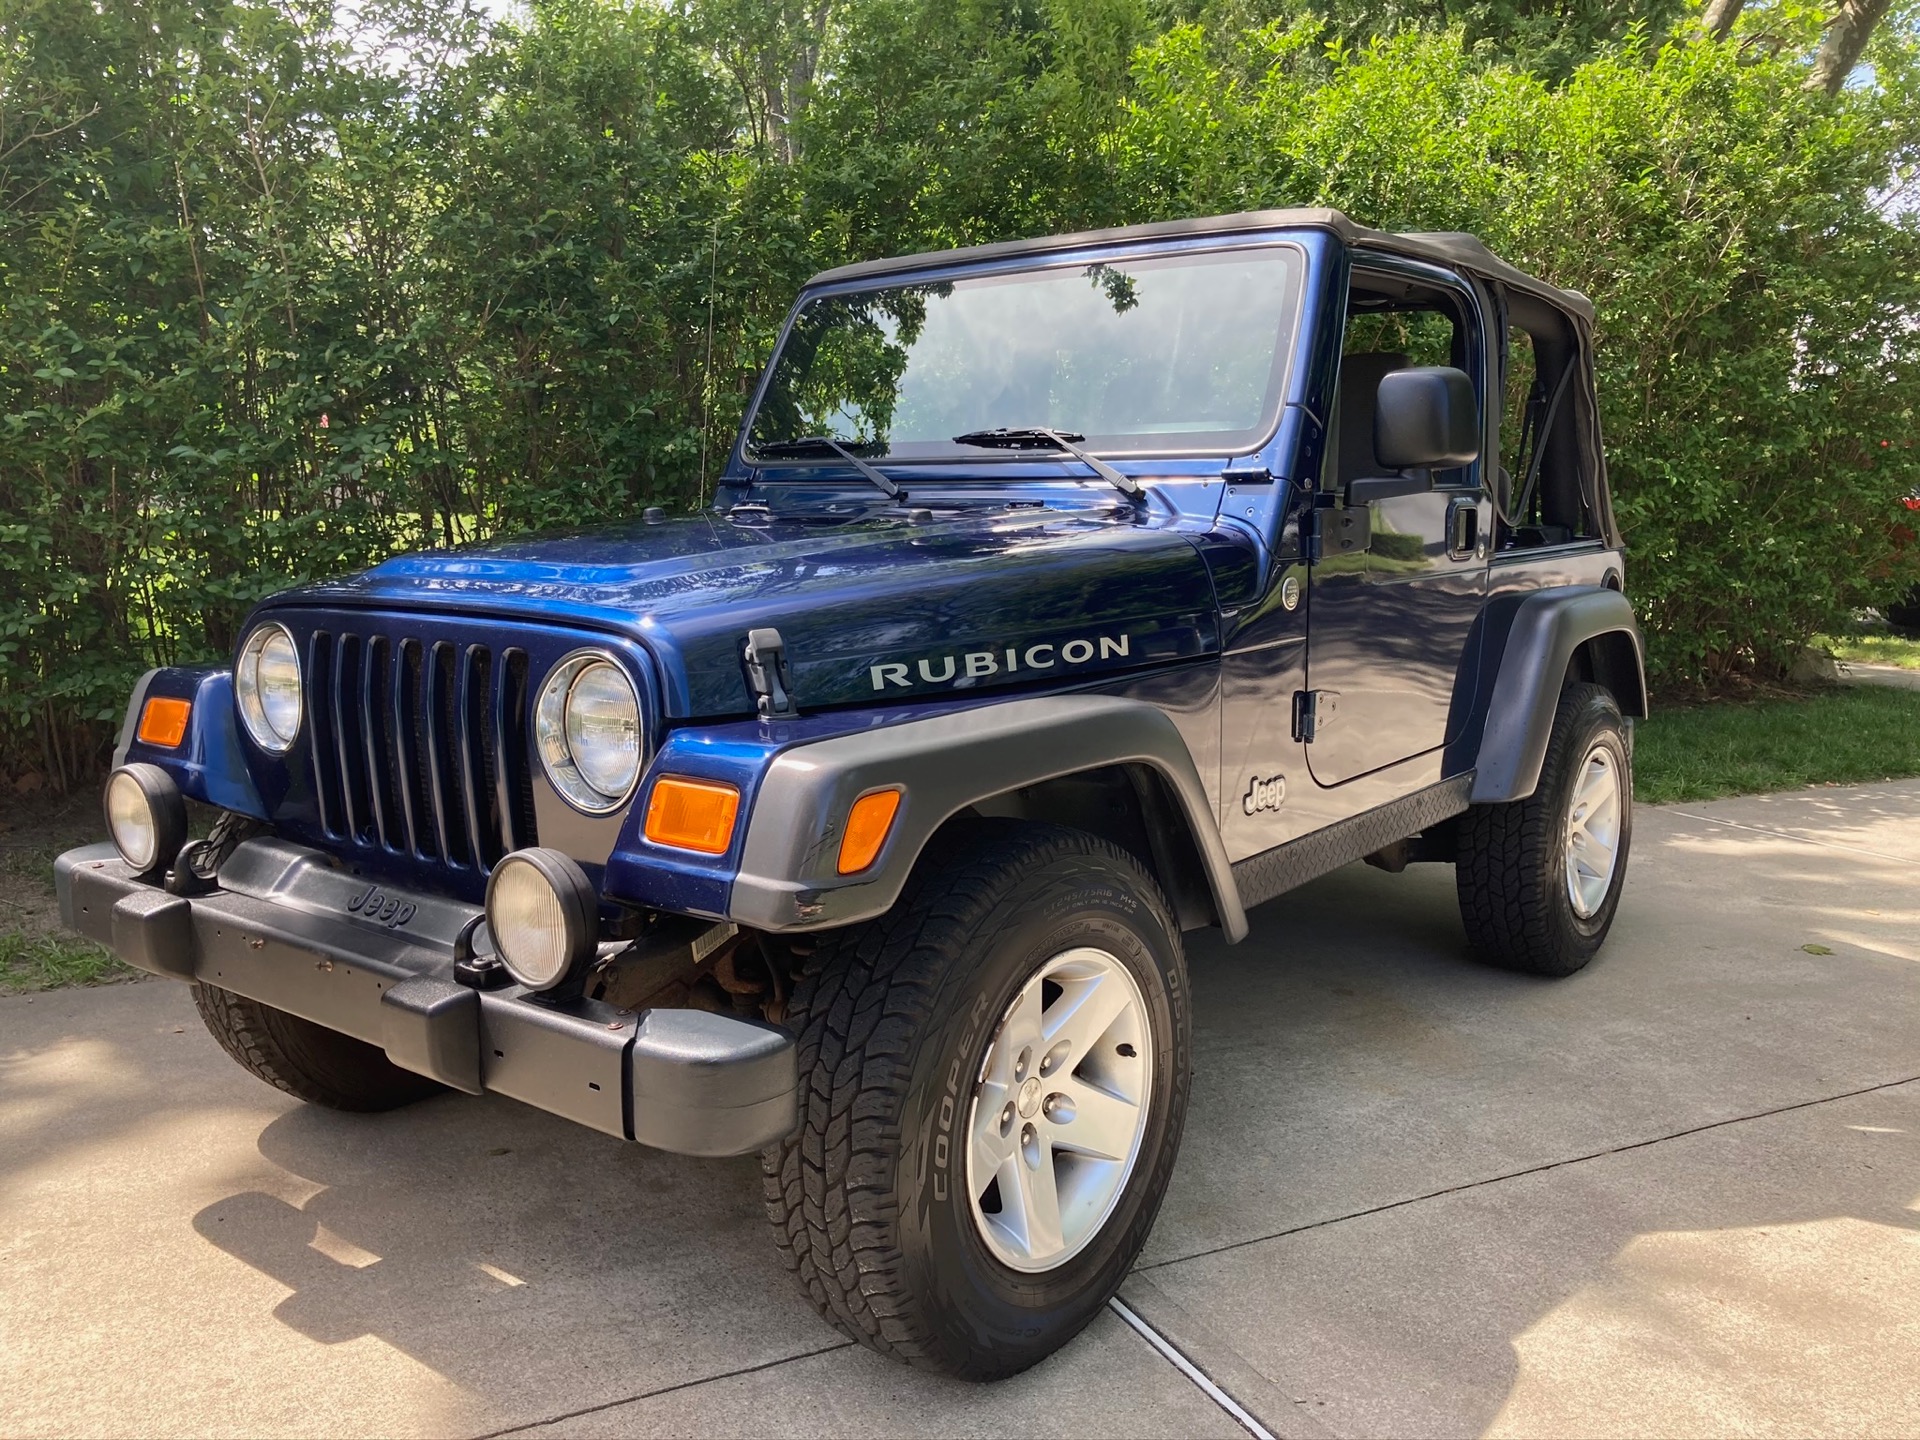 Used 2005 Jeep Wrangler Rubicon Automatic Rubicon For Sale ($14,900) |  Legend Leasing Stock #3519